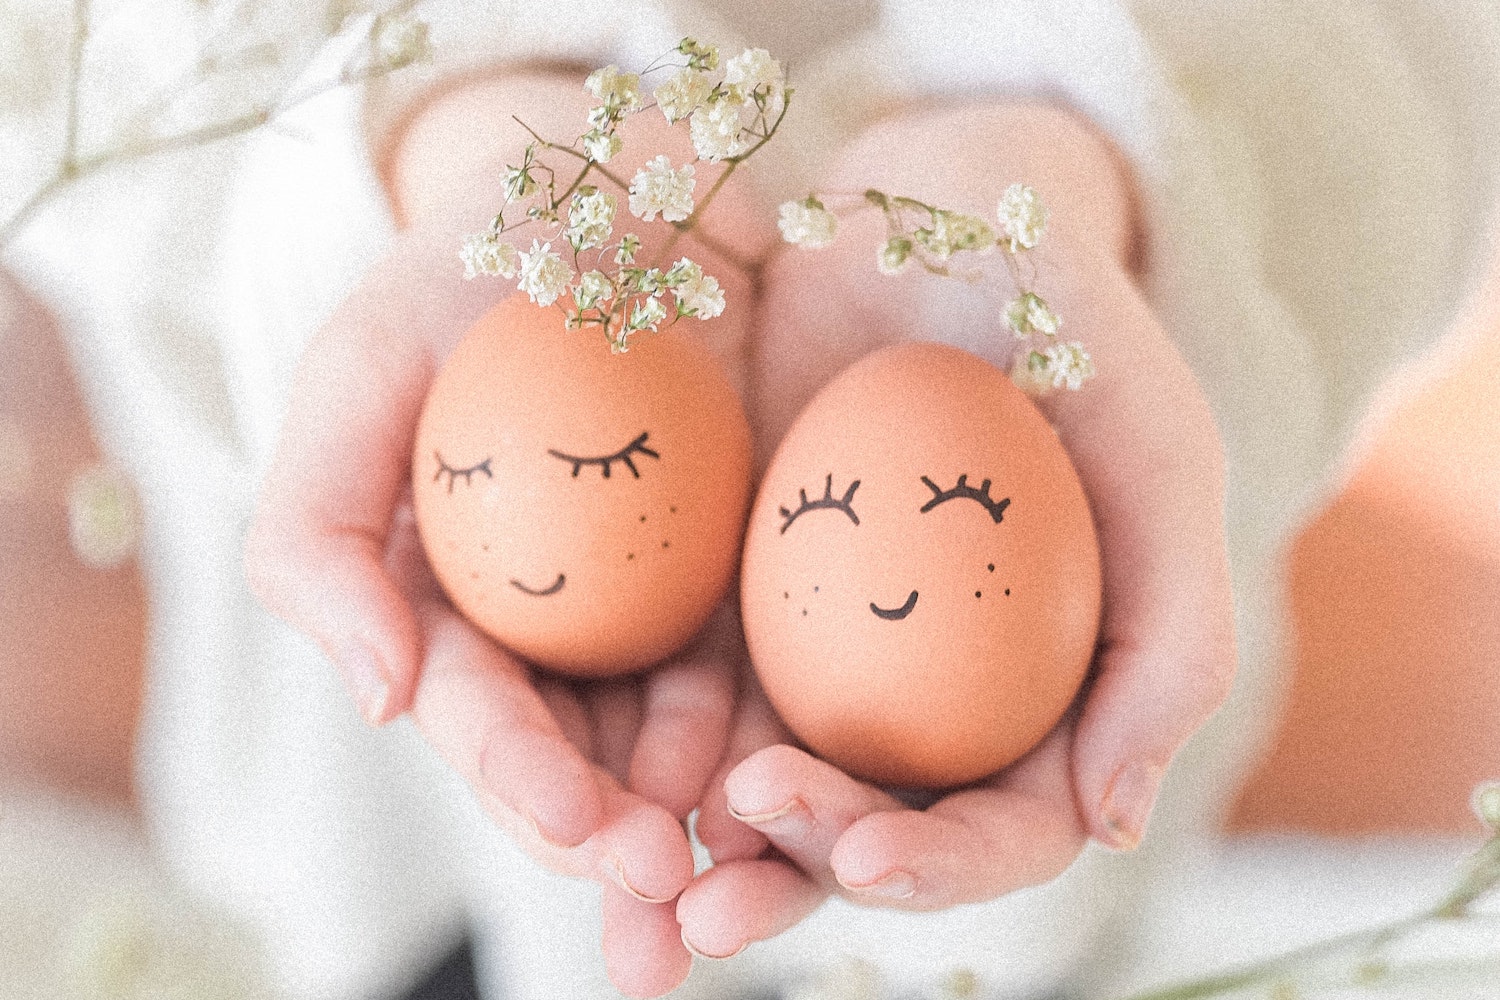 How to improve the quality of eggs for IVF naturally?￼